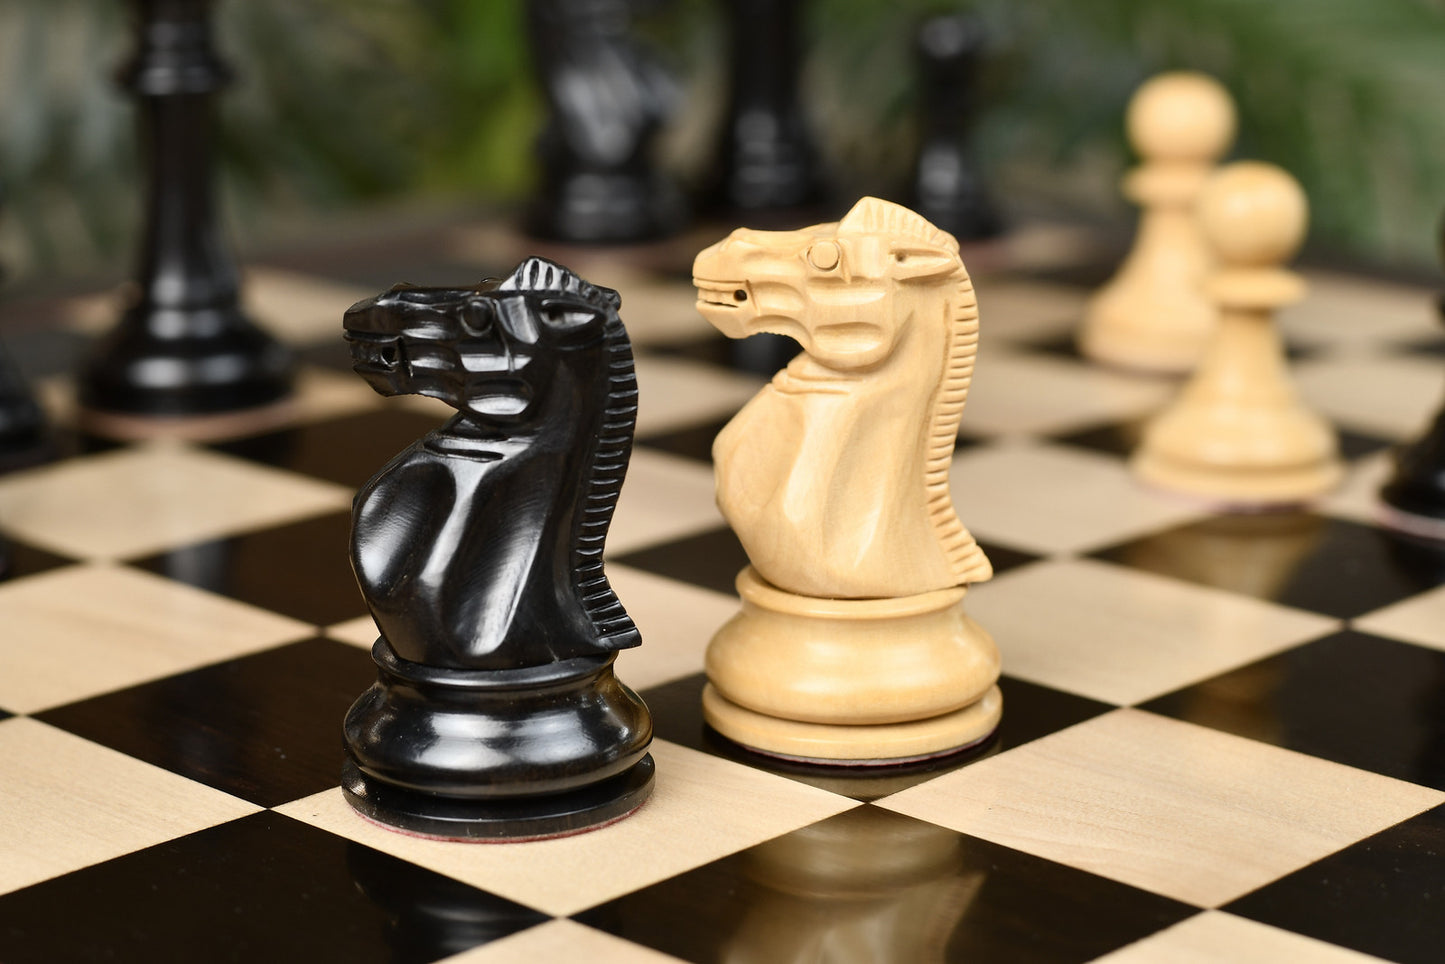 The Staunton Series (Jaques Pattern) Chess Pieces in Ebony & Box Wood - 3.4" King